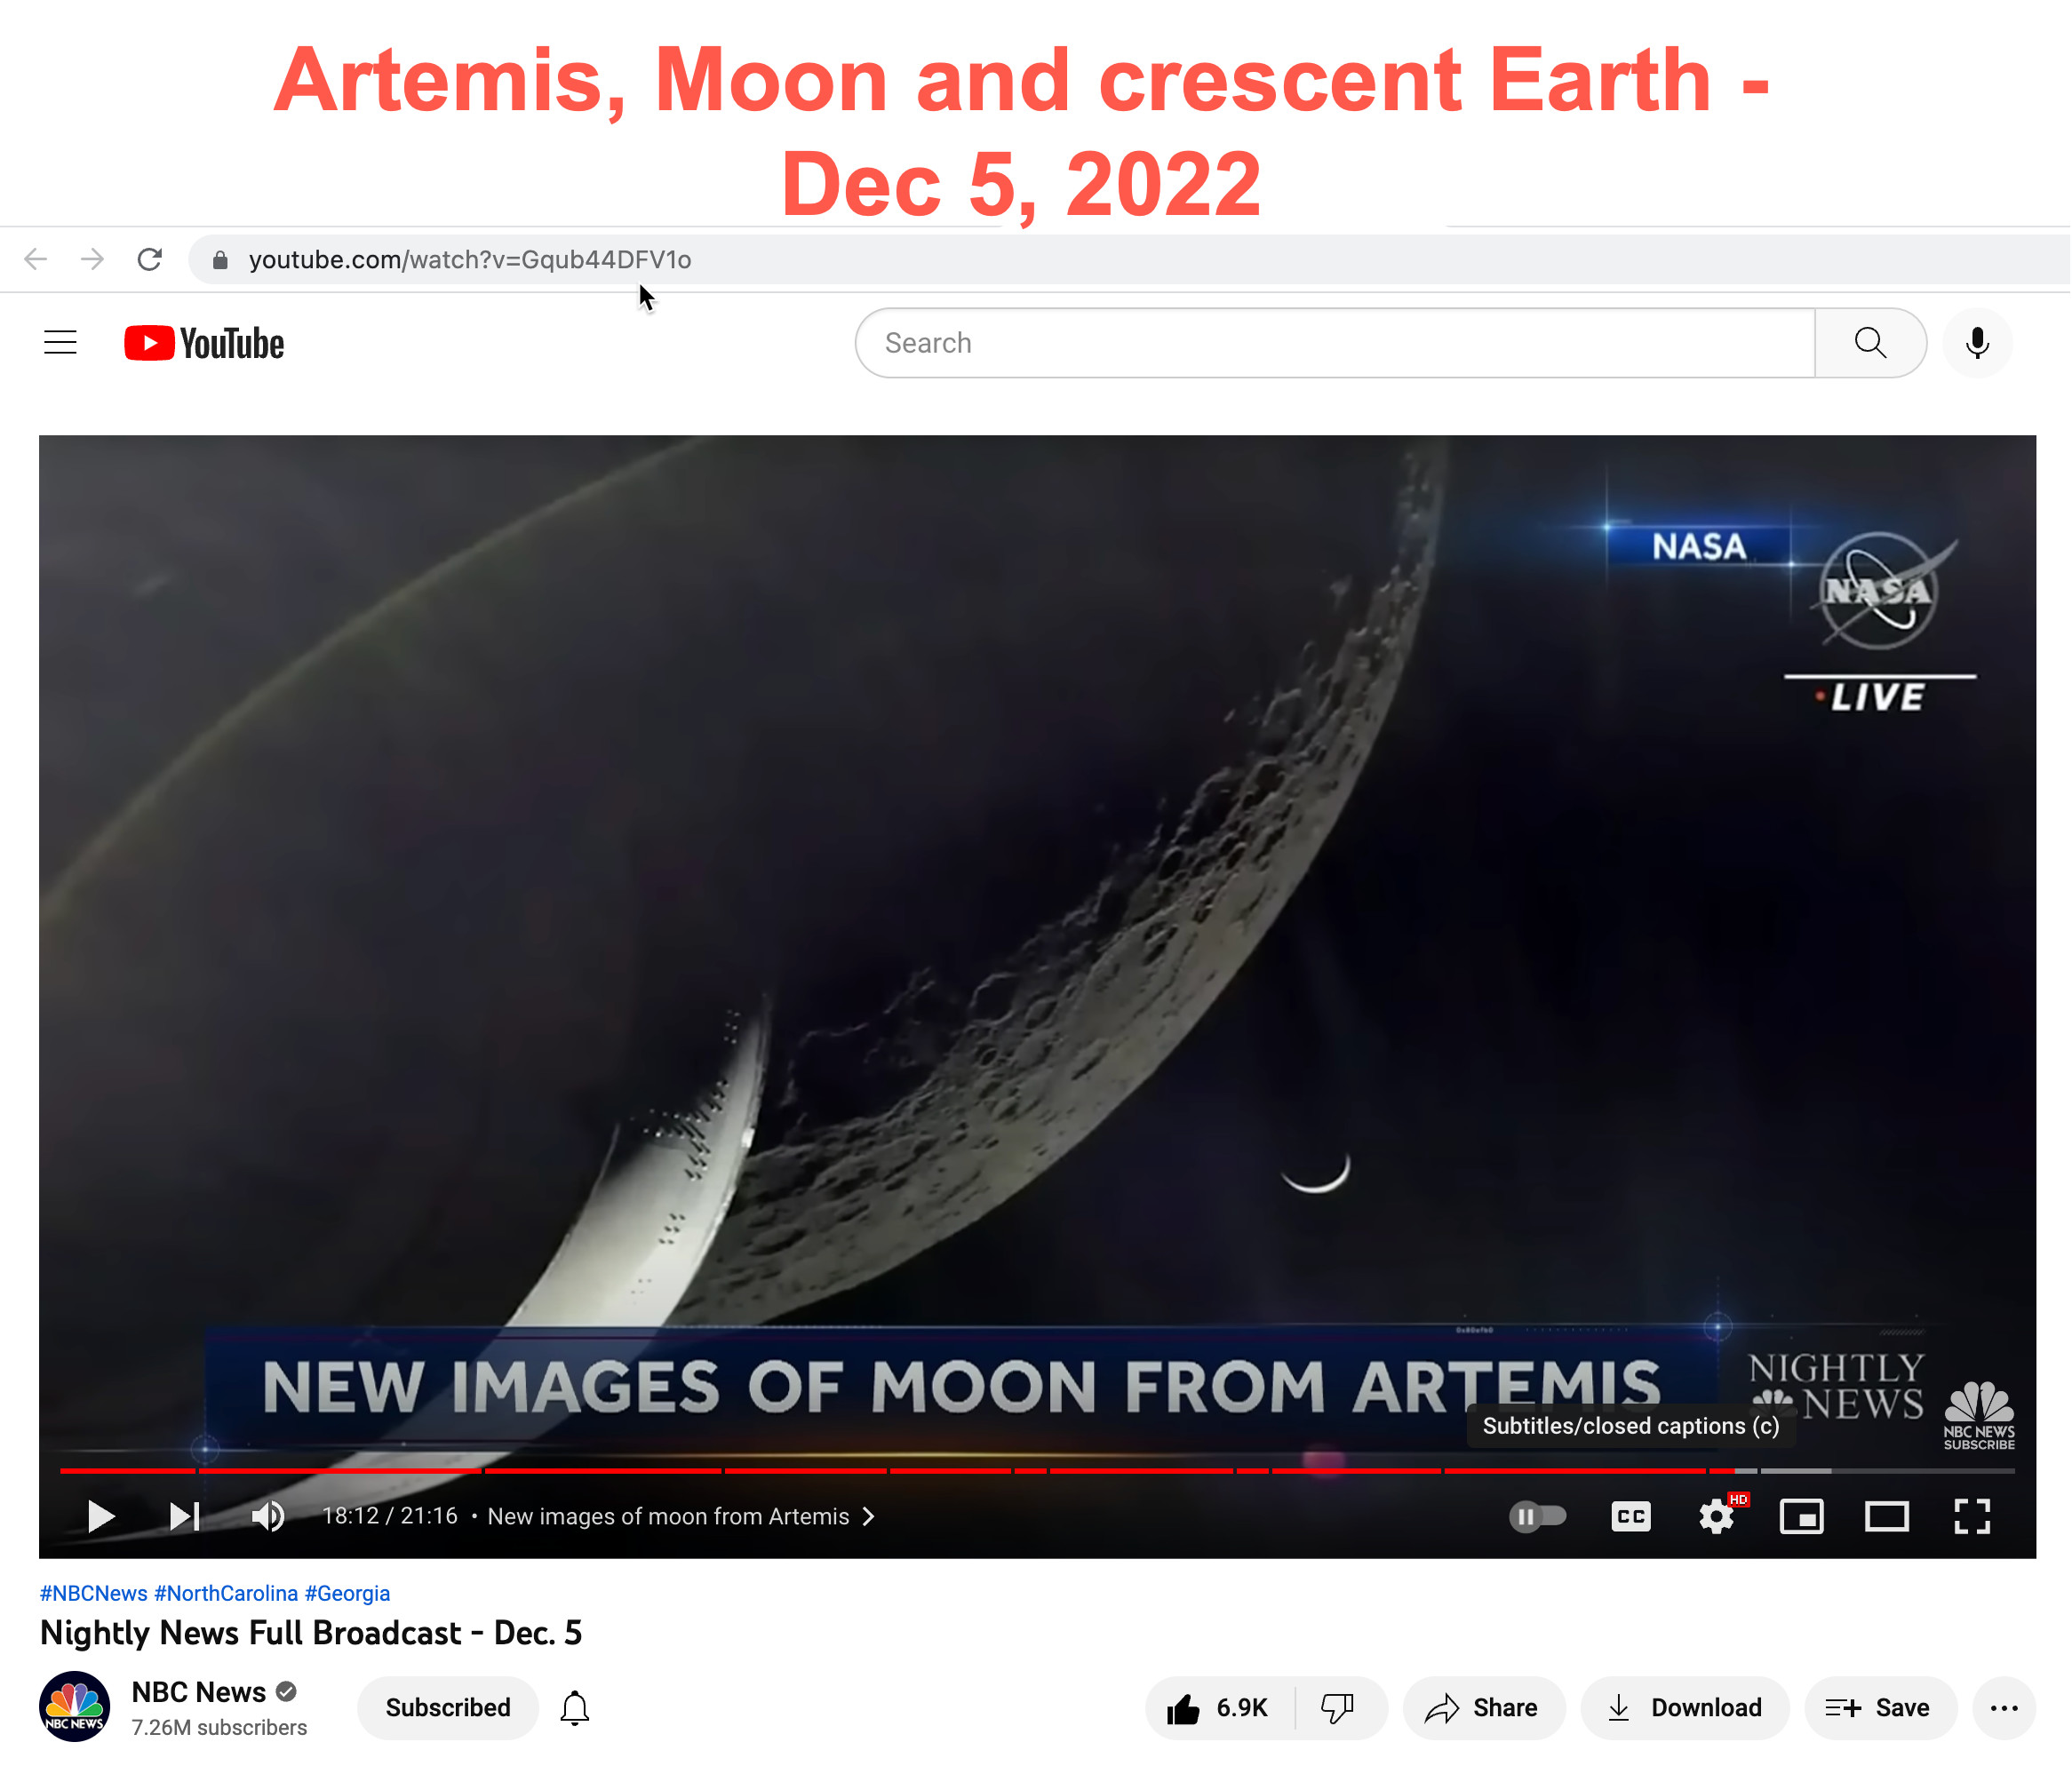 crescent Earth from Artemis.jpg